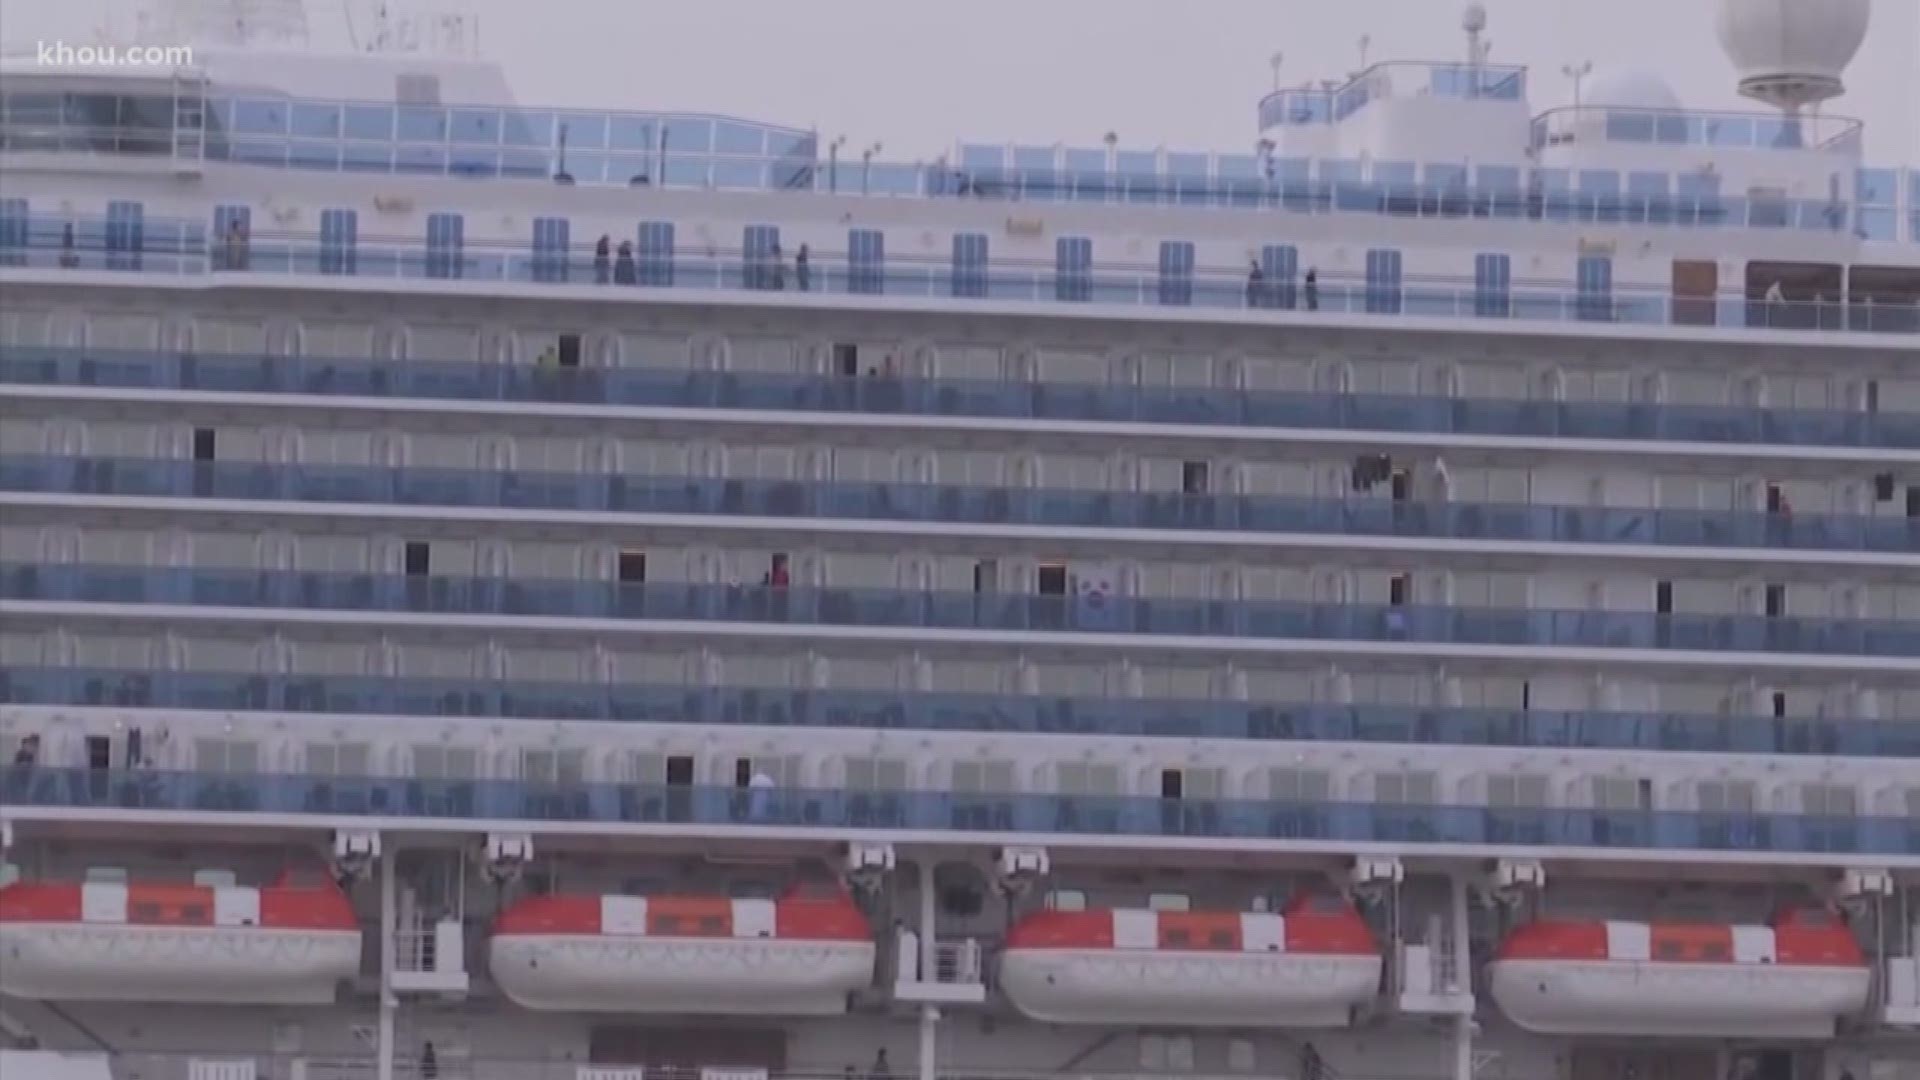 About 380 Americans who were quarantined on the Diamond Princess cruise ship due to the coronavirus are coming home.